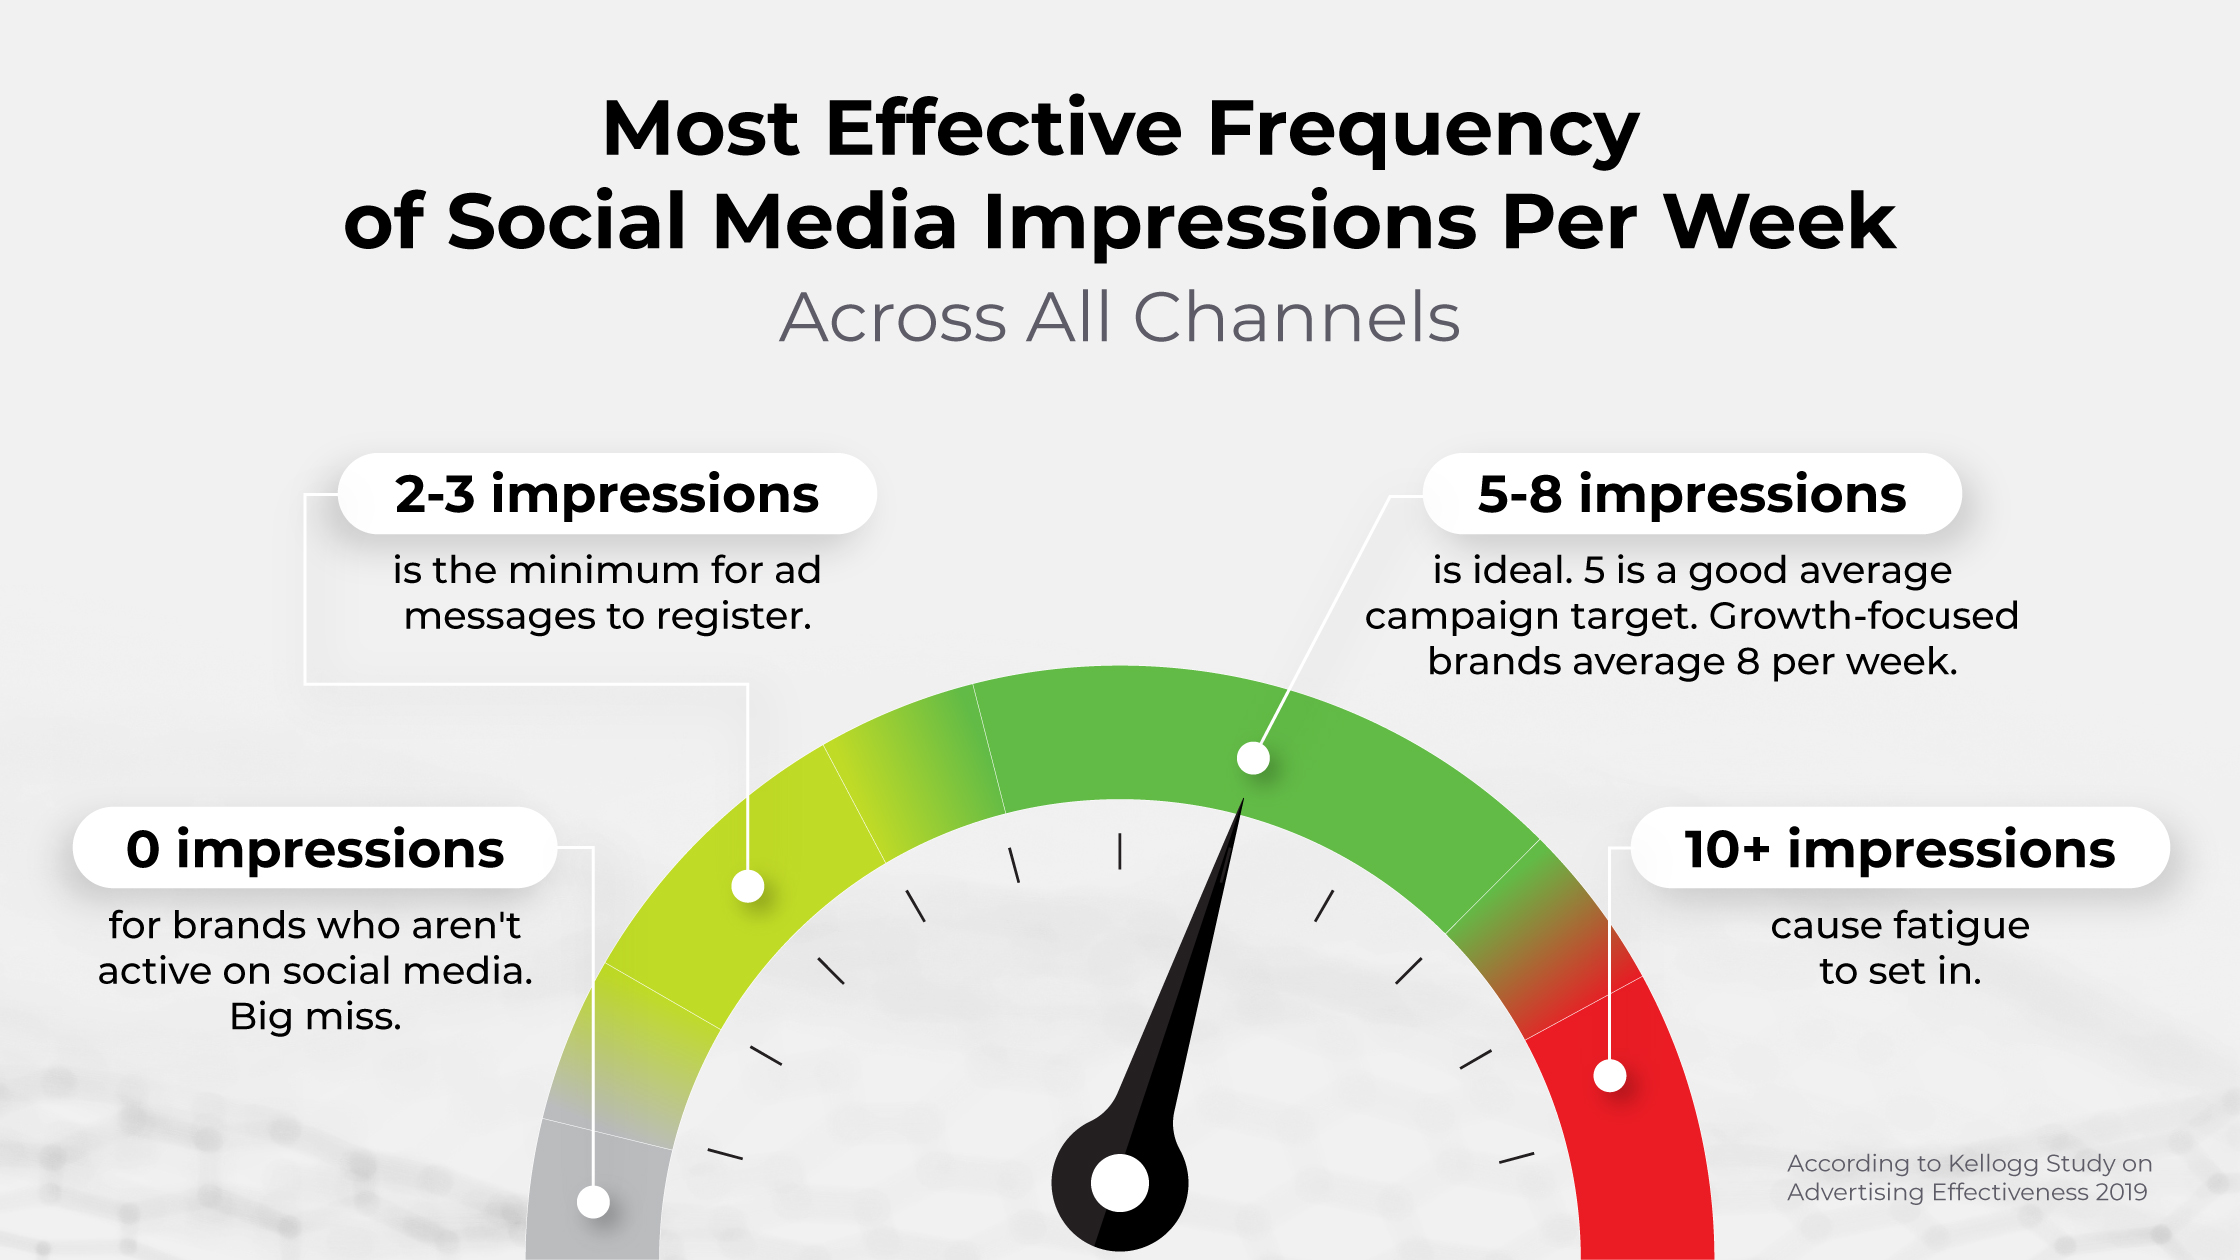 Most Effective Frequency of Social Media Impressions Per Week